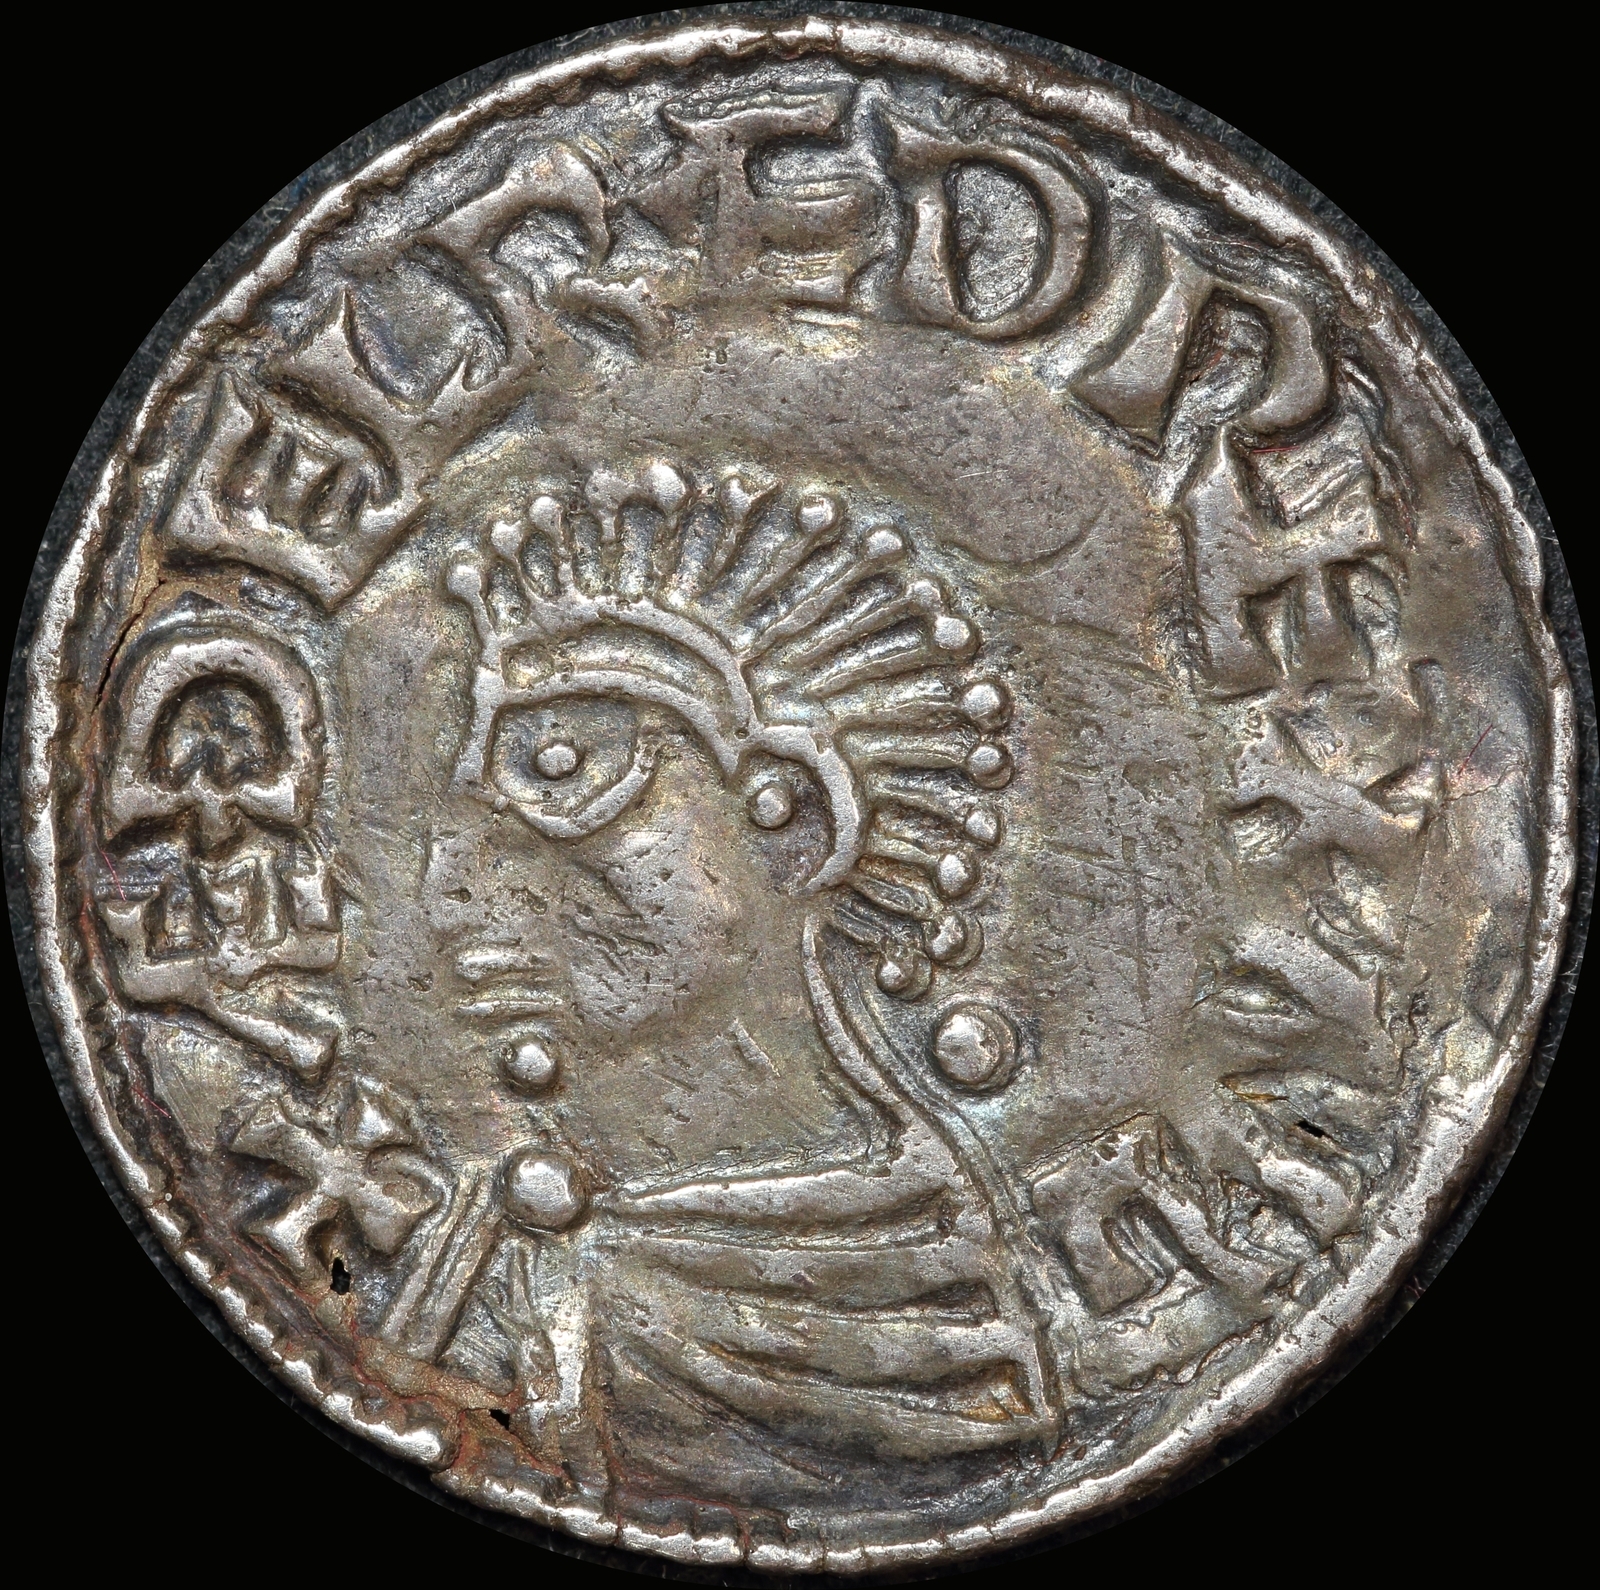 978 ~ 1016 AD Silver Penny Aethelred II (Ethelred the Unready) S#1151 about VF product image